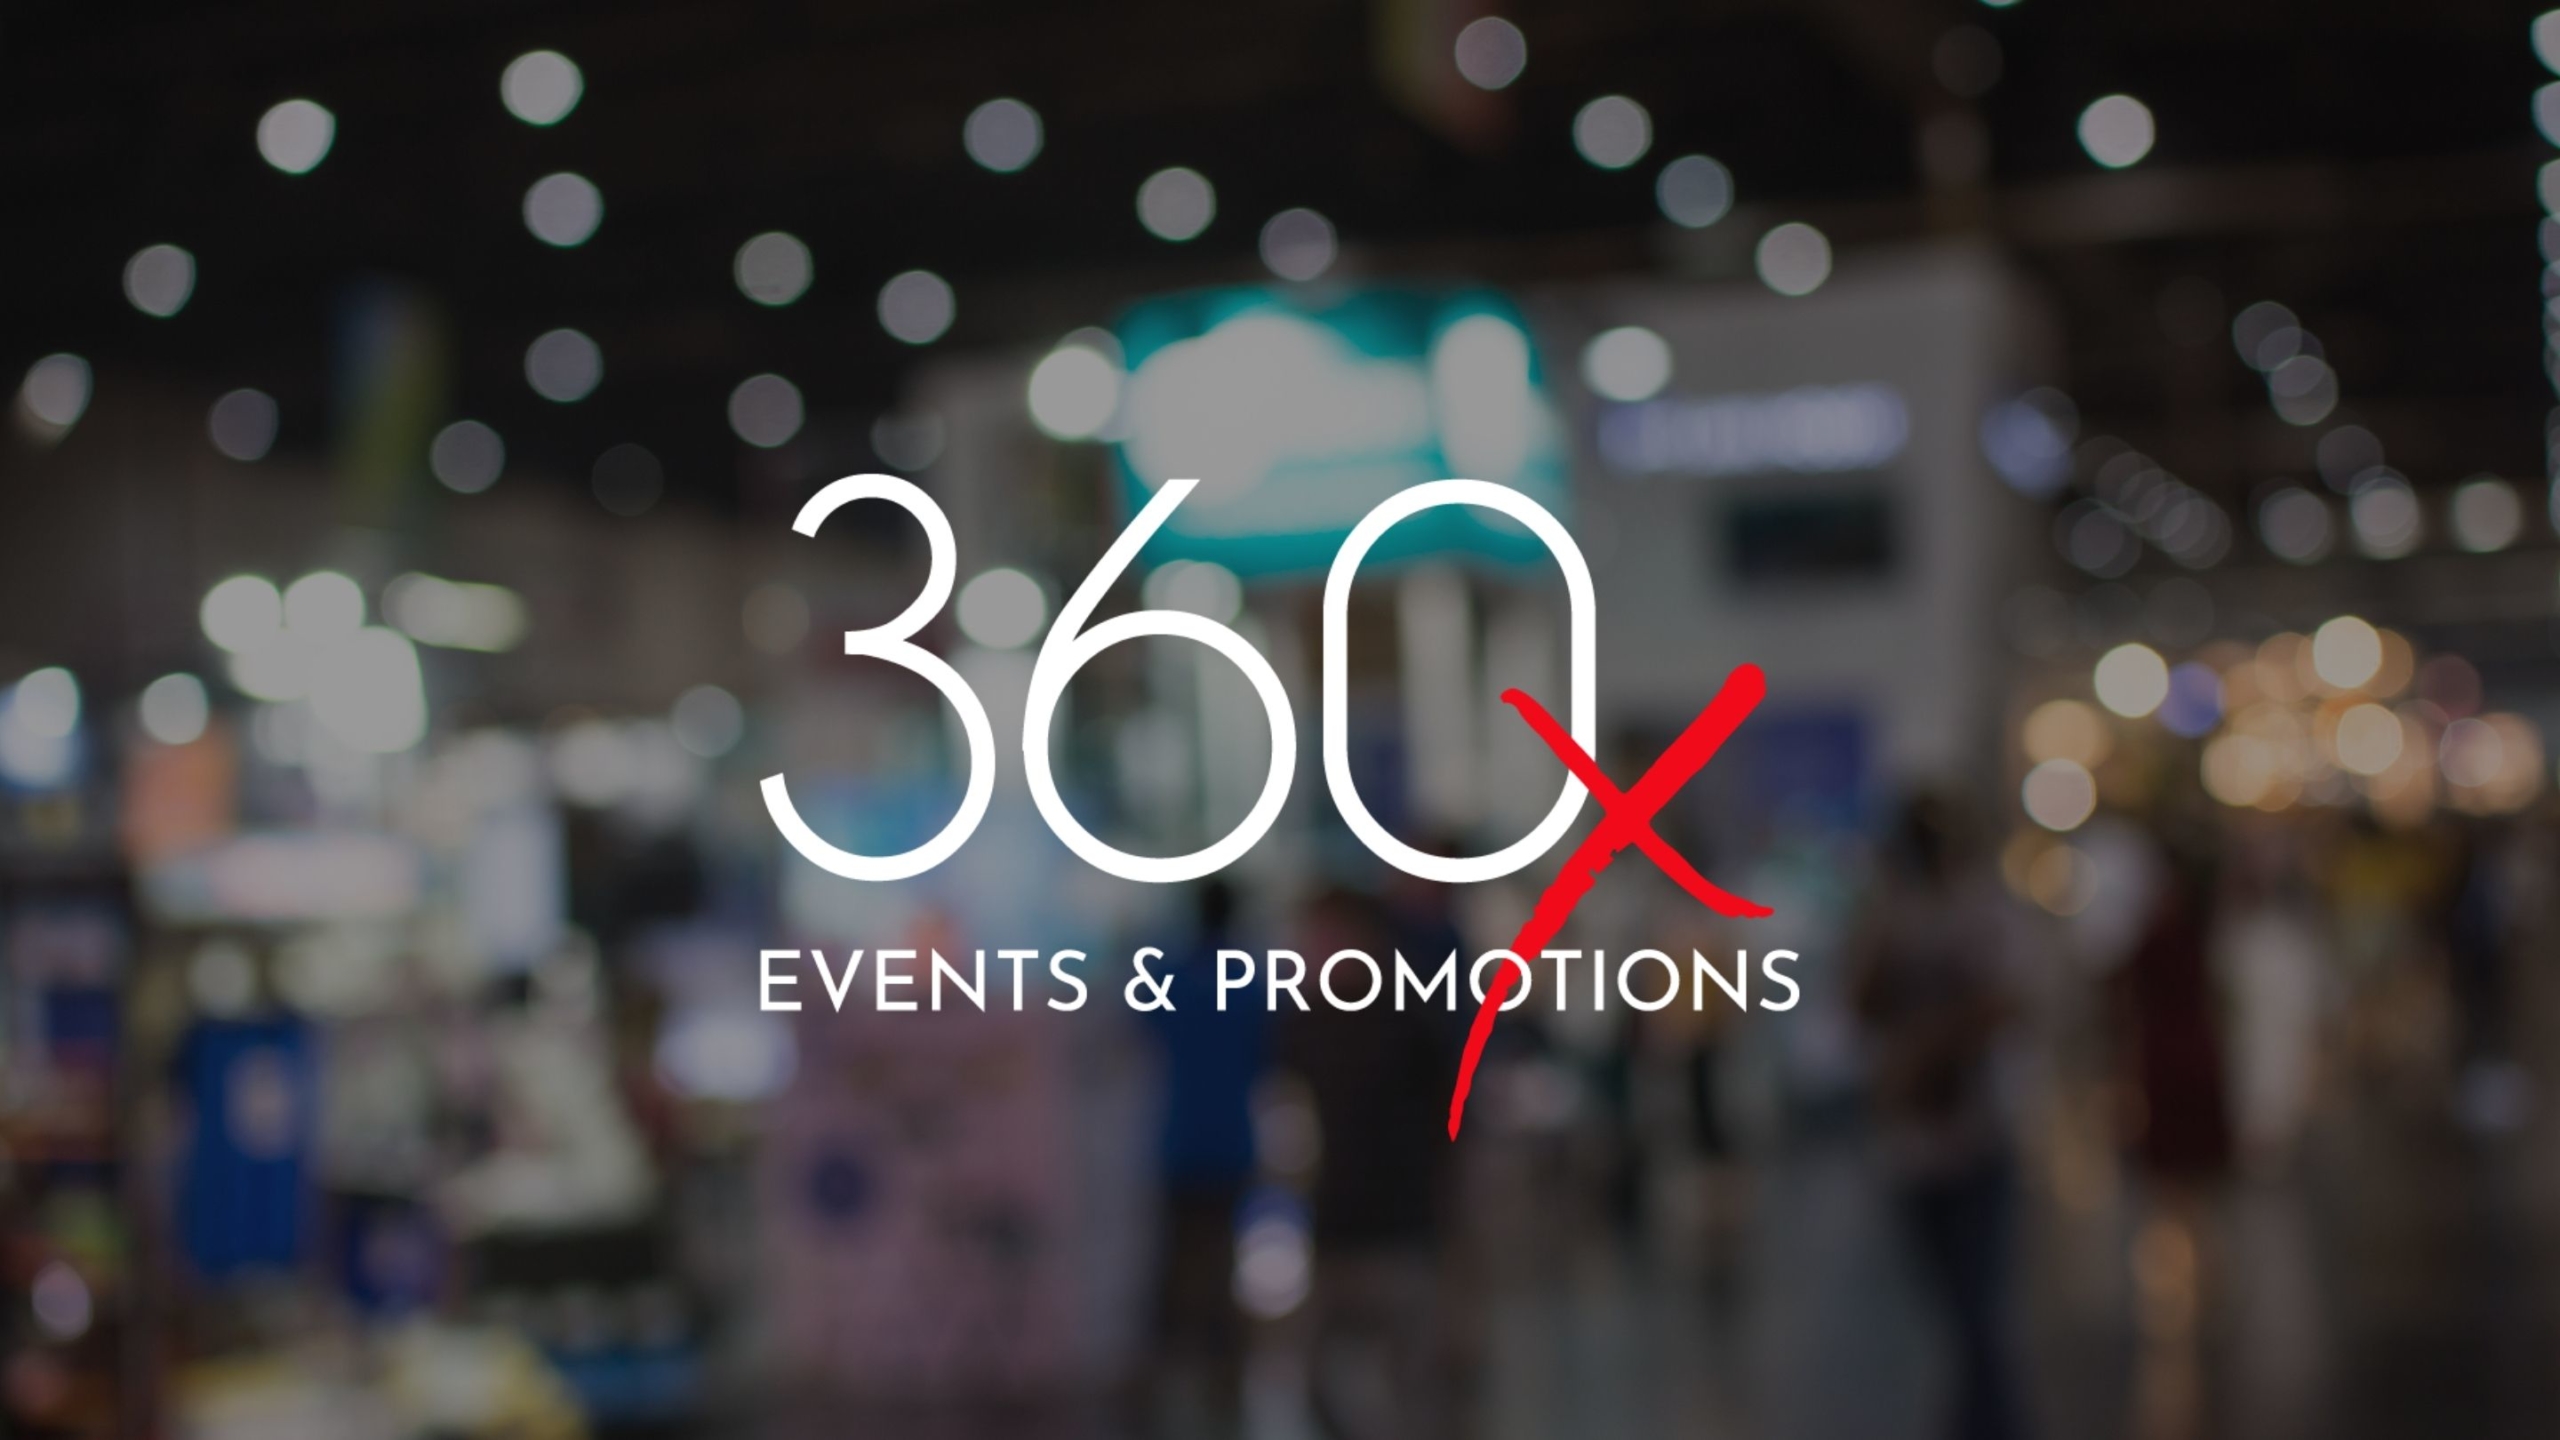 Welcome to 360x Events & Promotions - Live Events Staffing